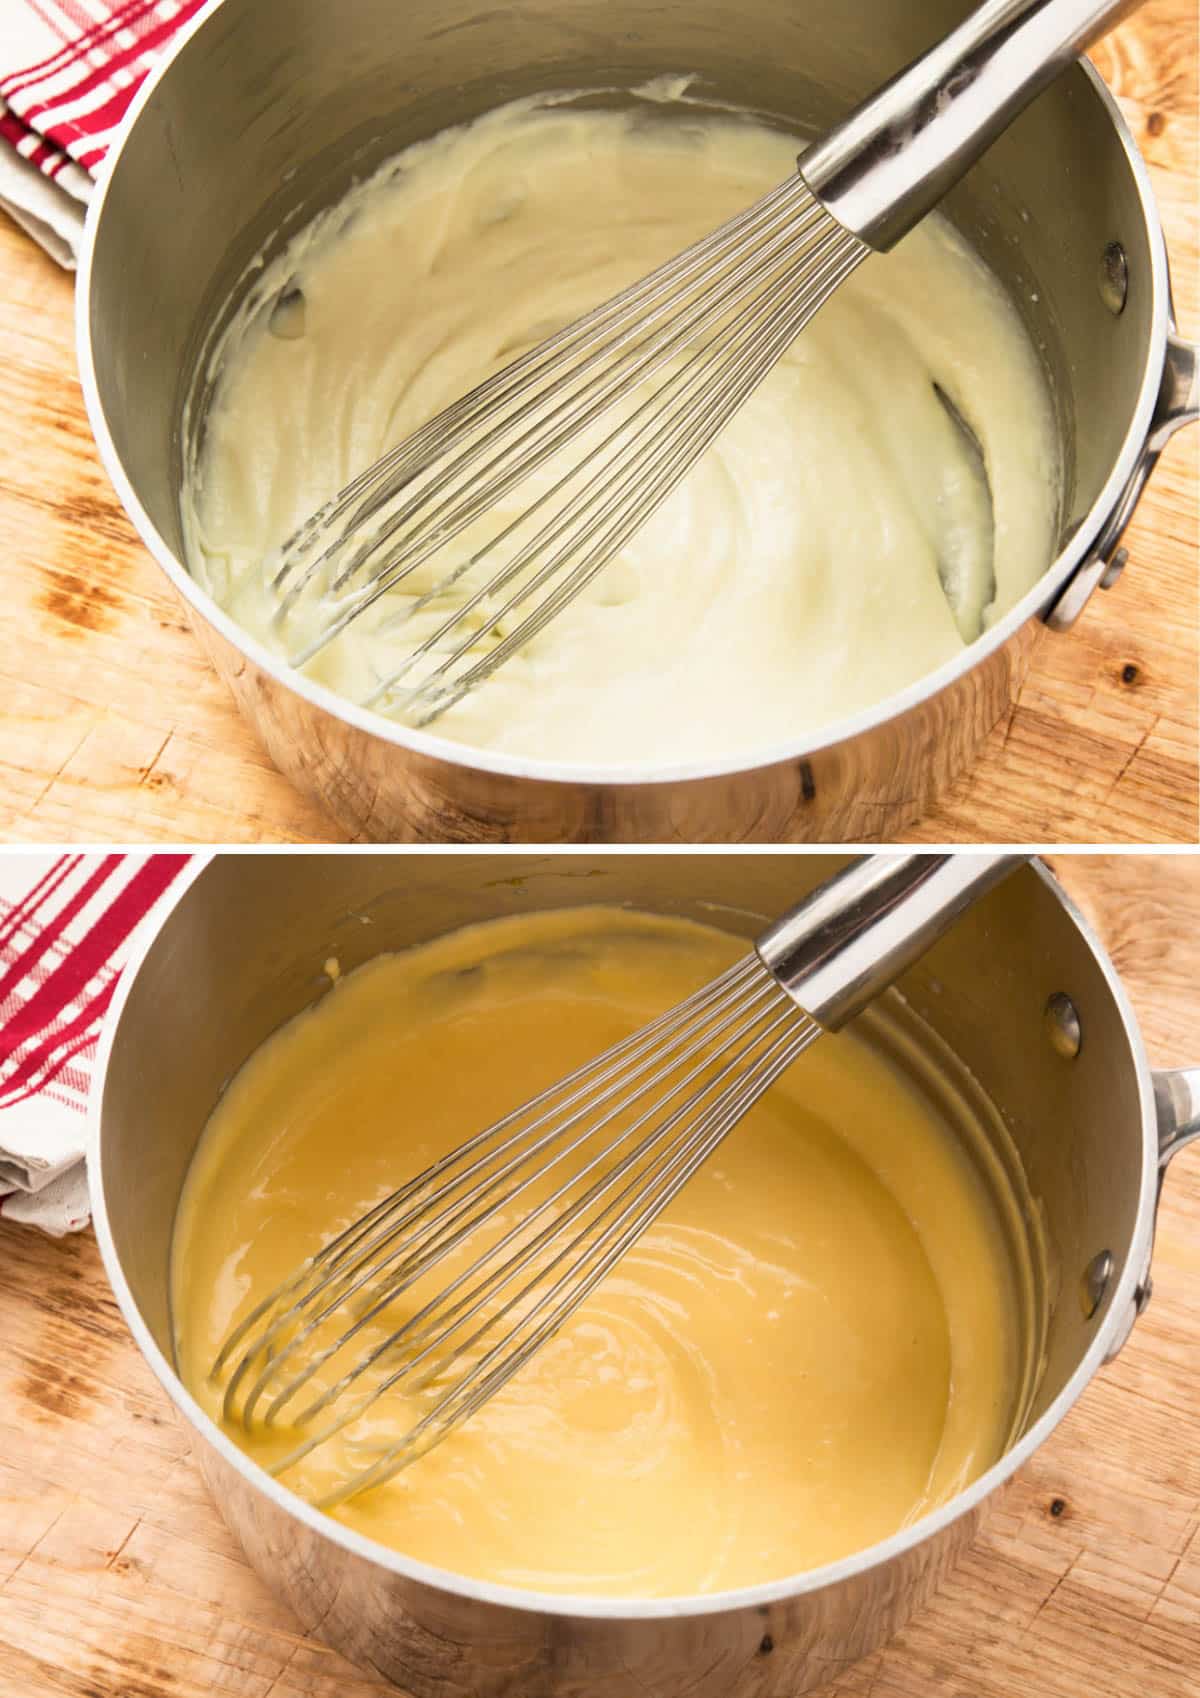 top photo: heavy bechamel sauce in a stainless steel pot with a whisk; bottom photo: egg yolks mixed into the same bechamel sauce with a whisk